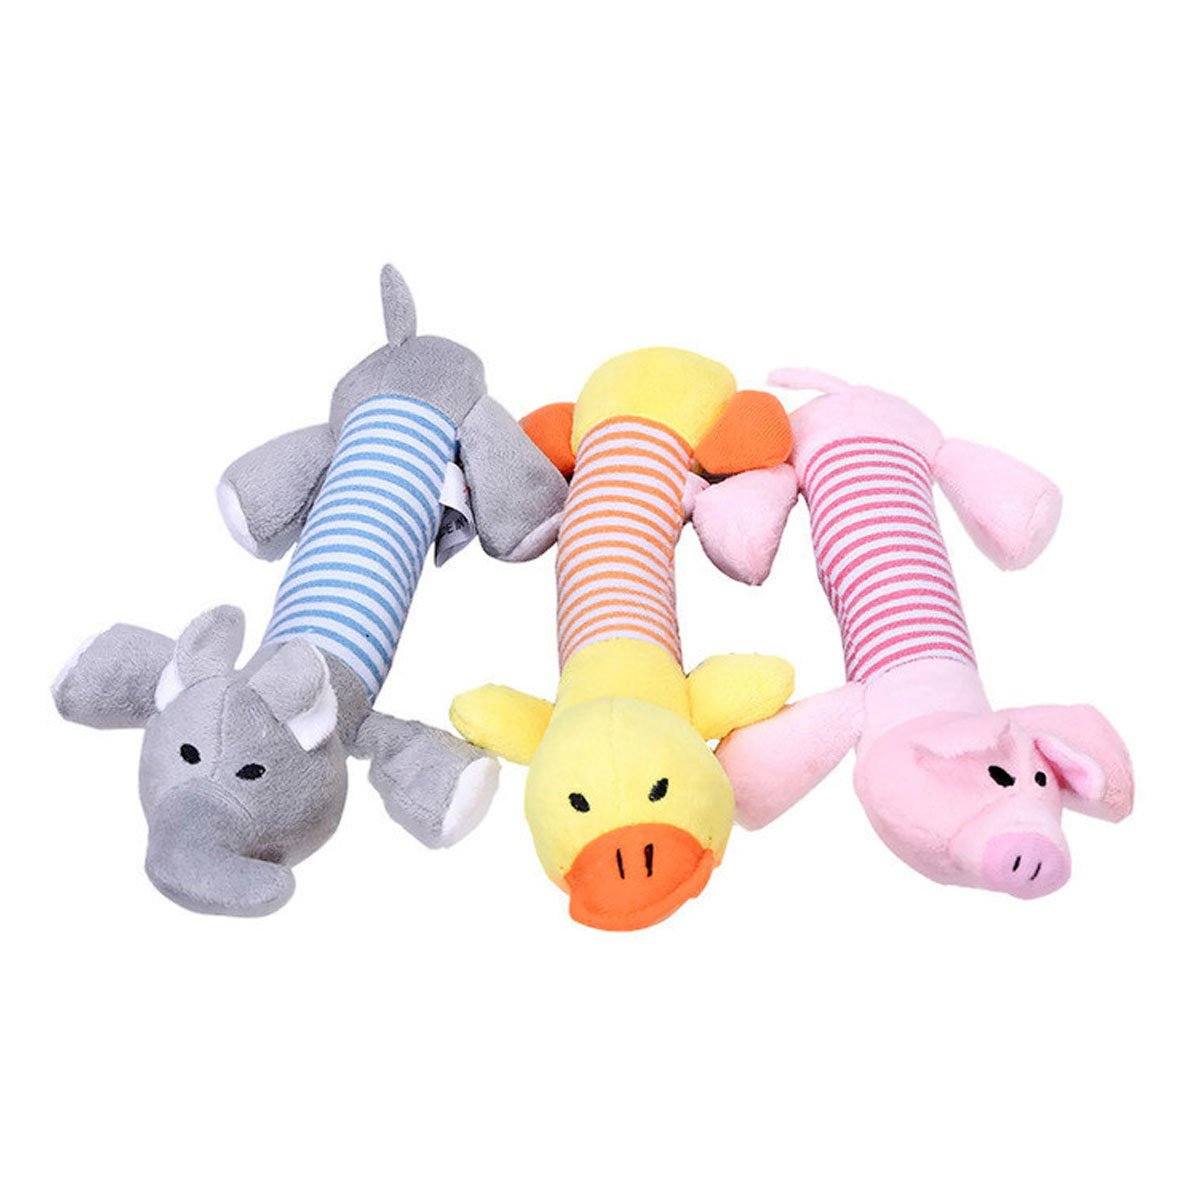 Squeaky Plush Dog Toy - Pig Elephant or Duck | Pawlicious & Company